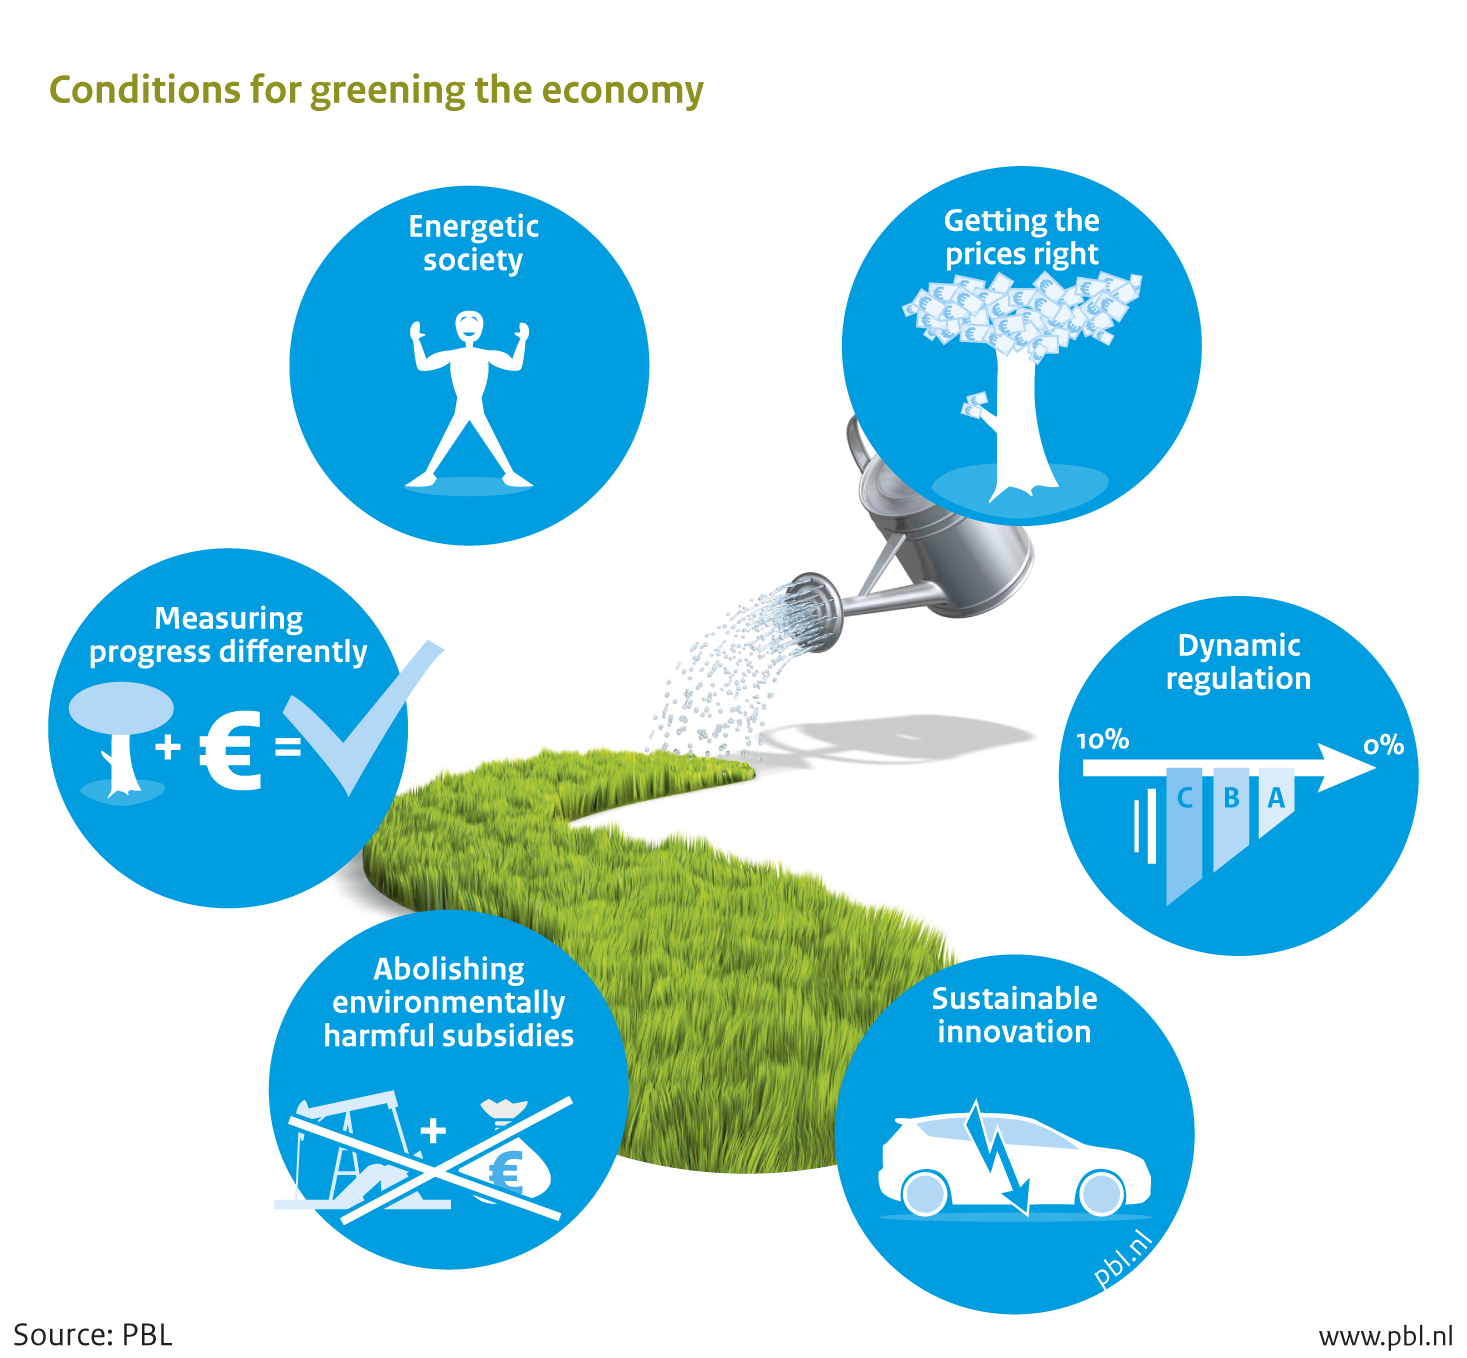 Conditions for greening the economy: read the text for more information